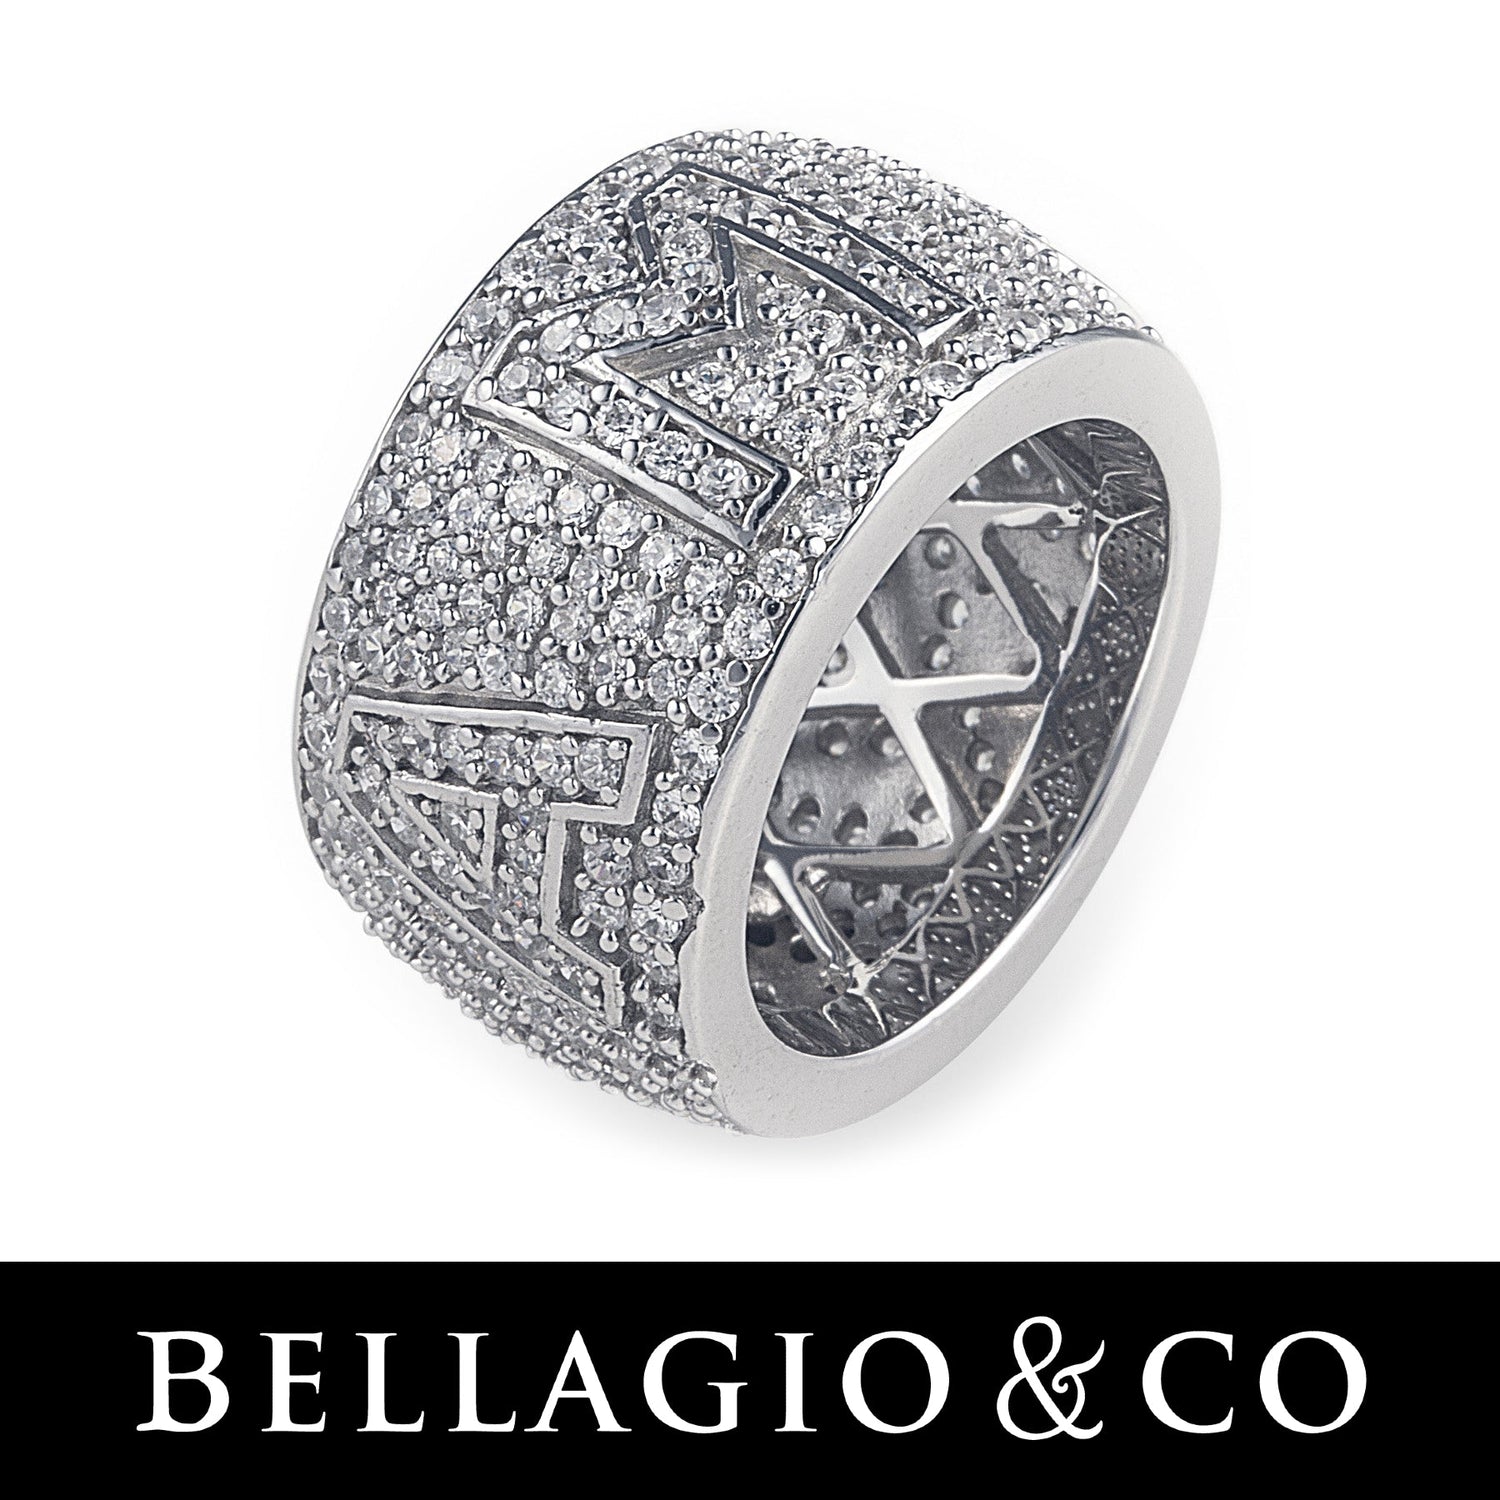 Shop the love-themed Amore jewellery collection by Bellagio & Co. Worldwide shipping.